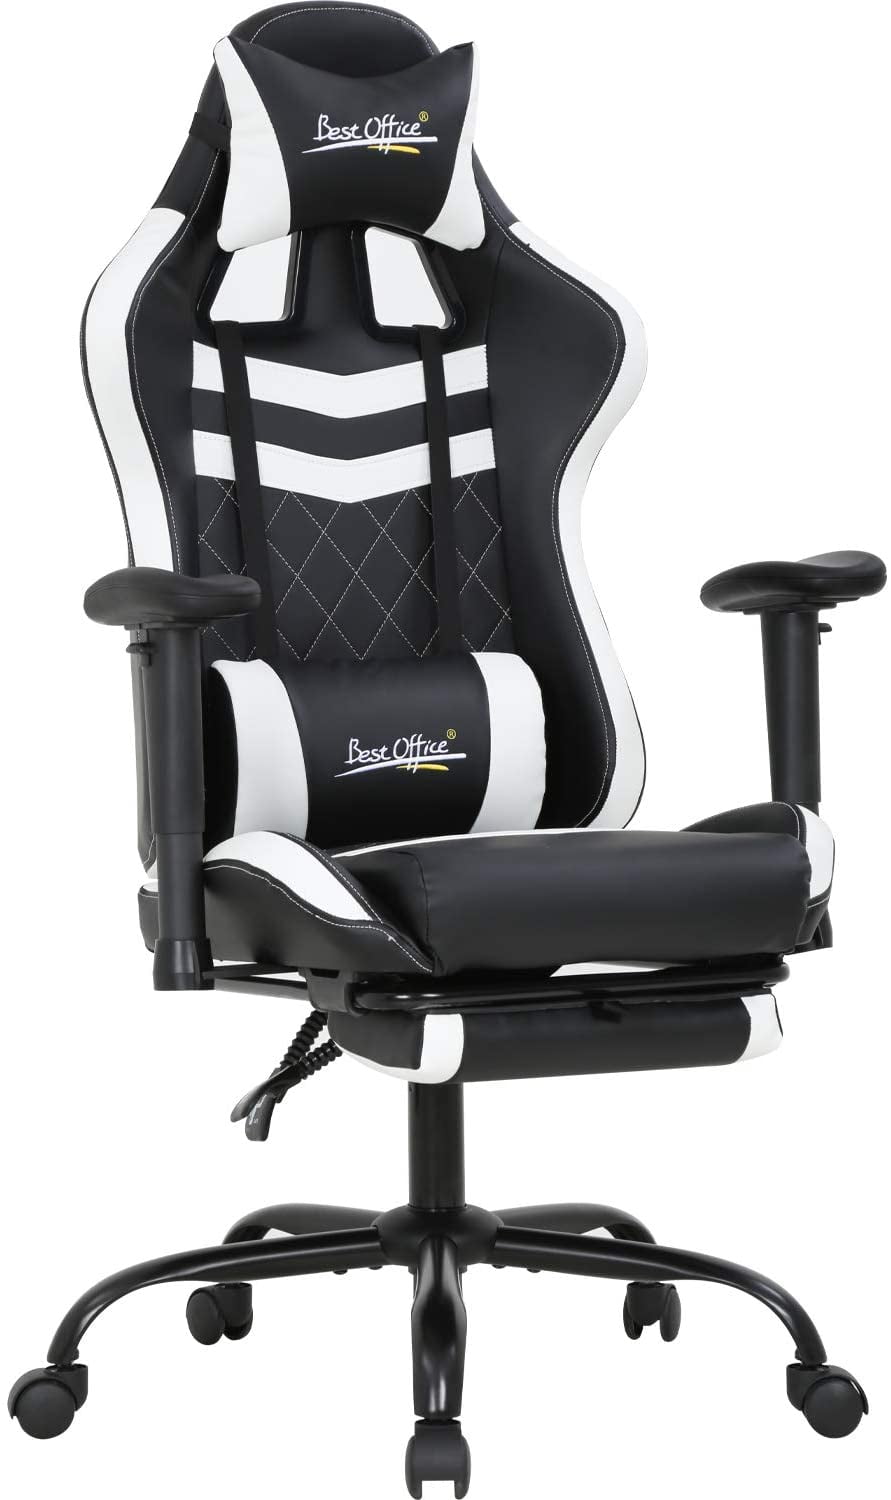 PC Racing Desk Chair with Lumbar Support Adjustable Backrest Headrest and Height BASETBL Gaming Chair Ergonomic Office Chair Ideal Swivel Chair for Playing Working-White